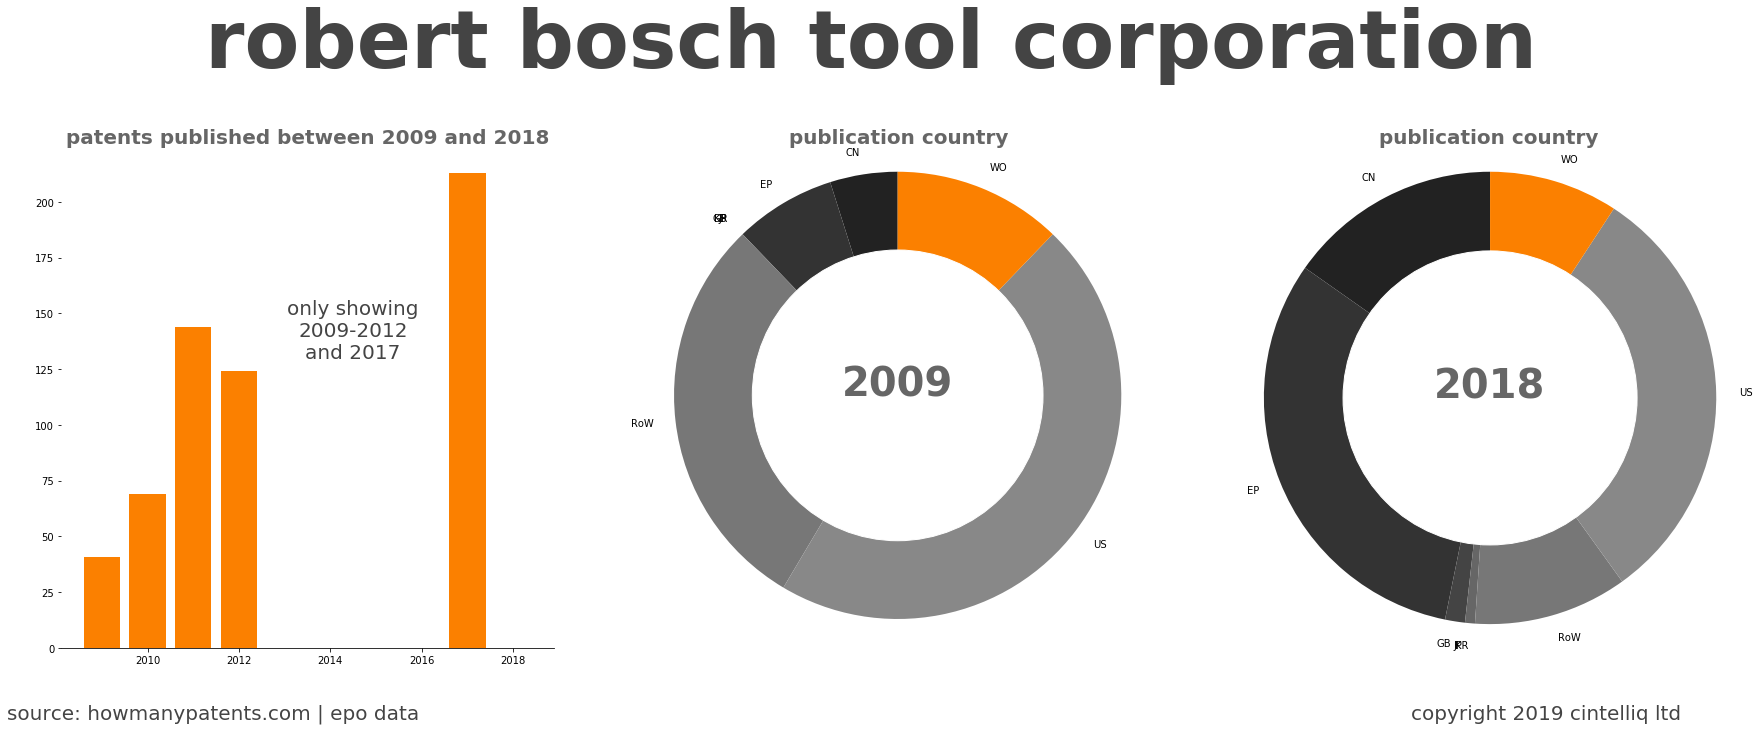 summary of patents for Robert Bosch Tool Corporation